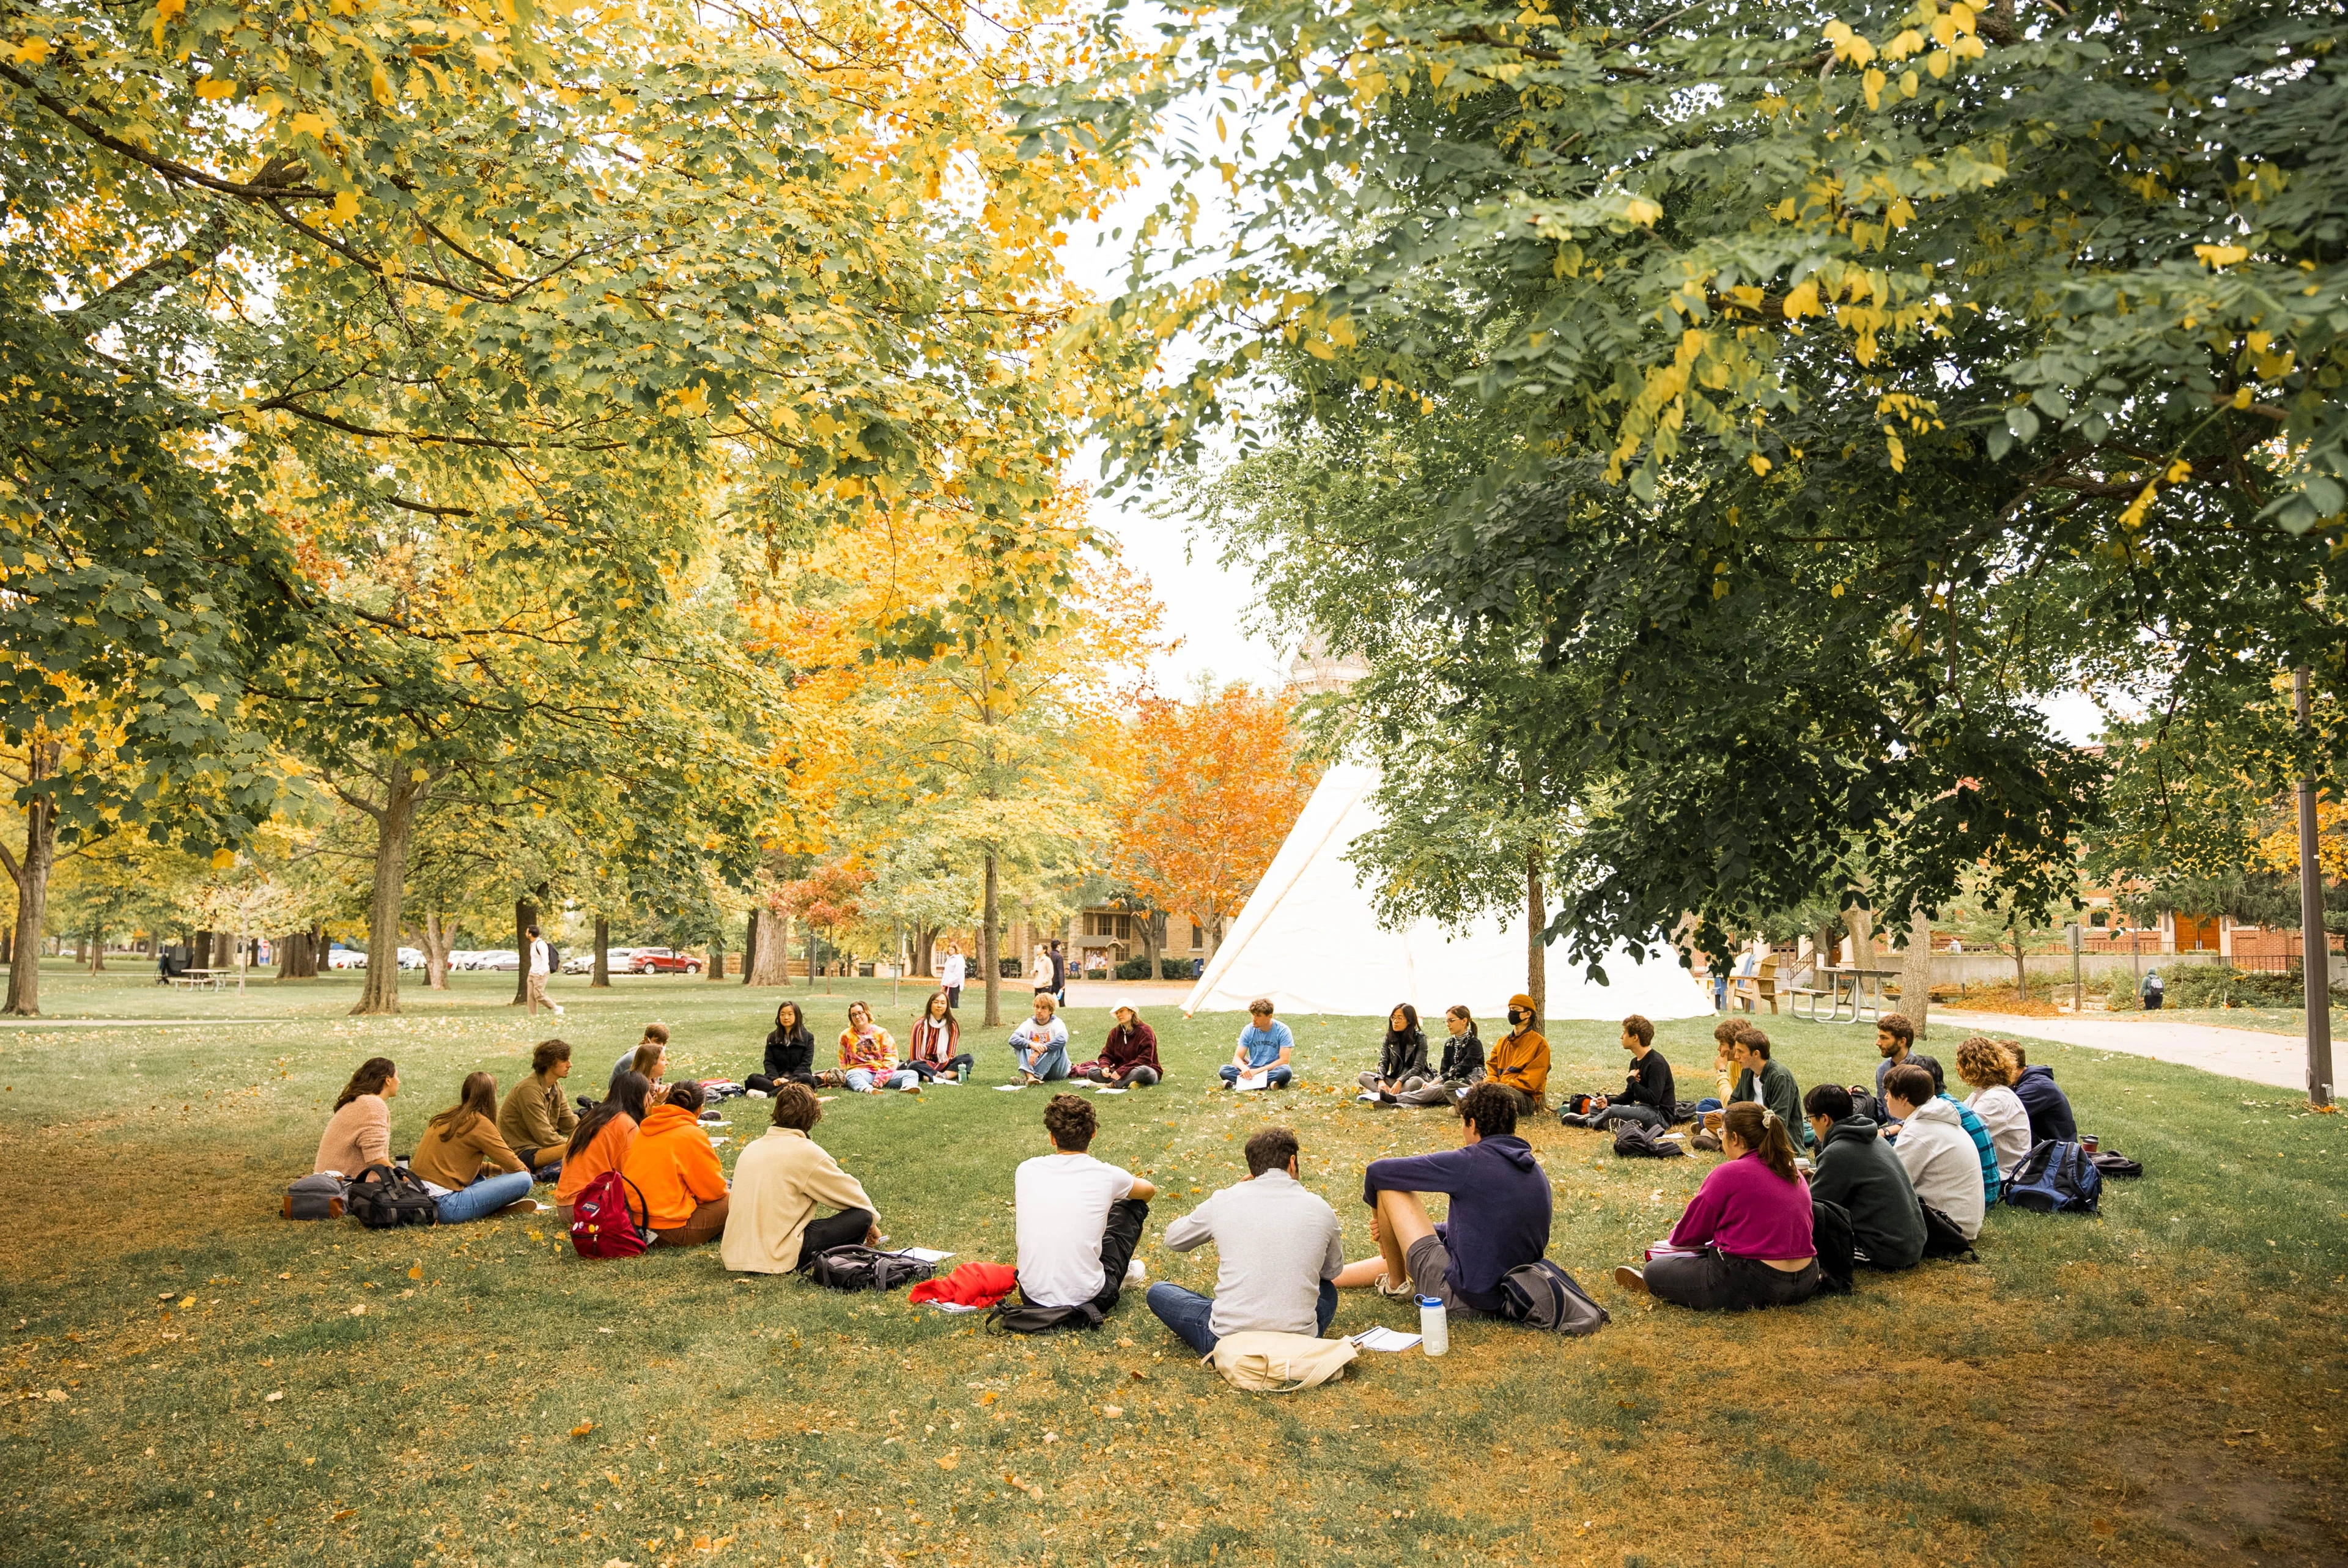 A group of students sits in a circle in the grass underneath trees on a sunny day